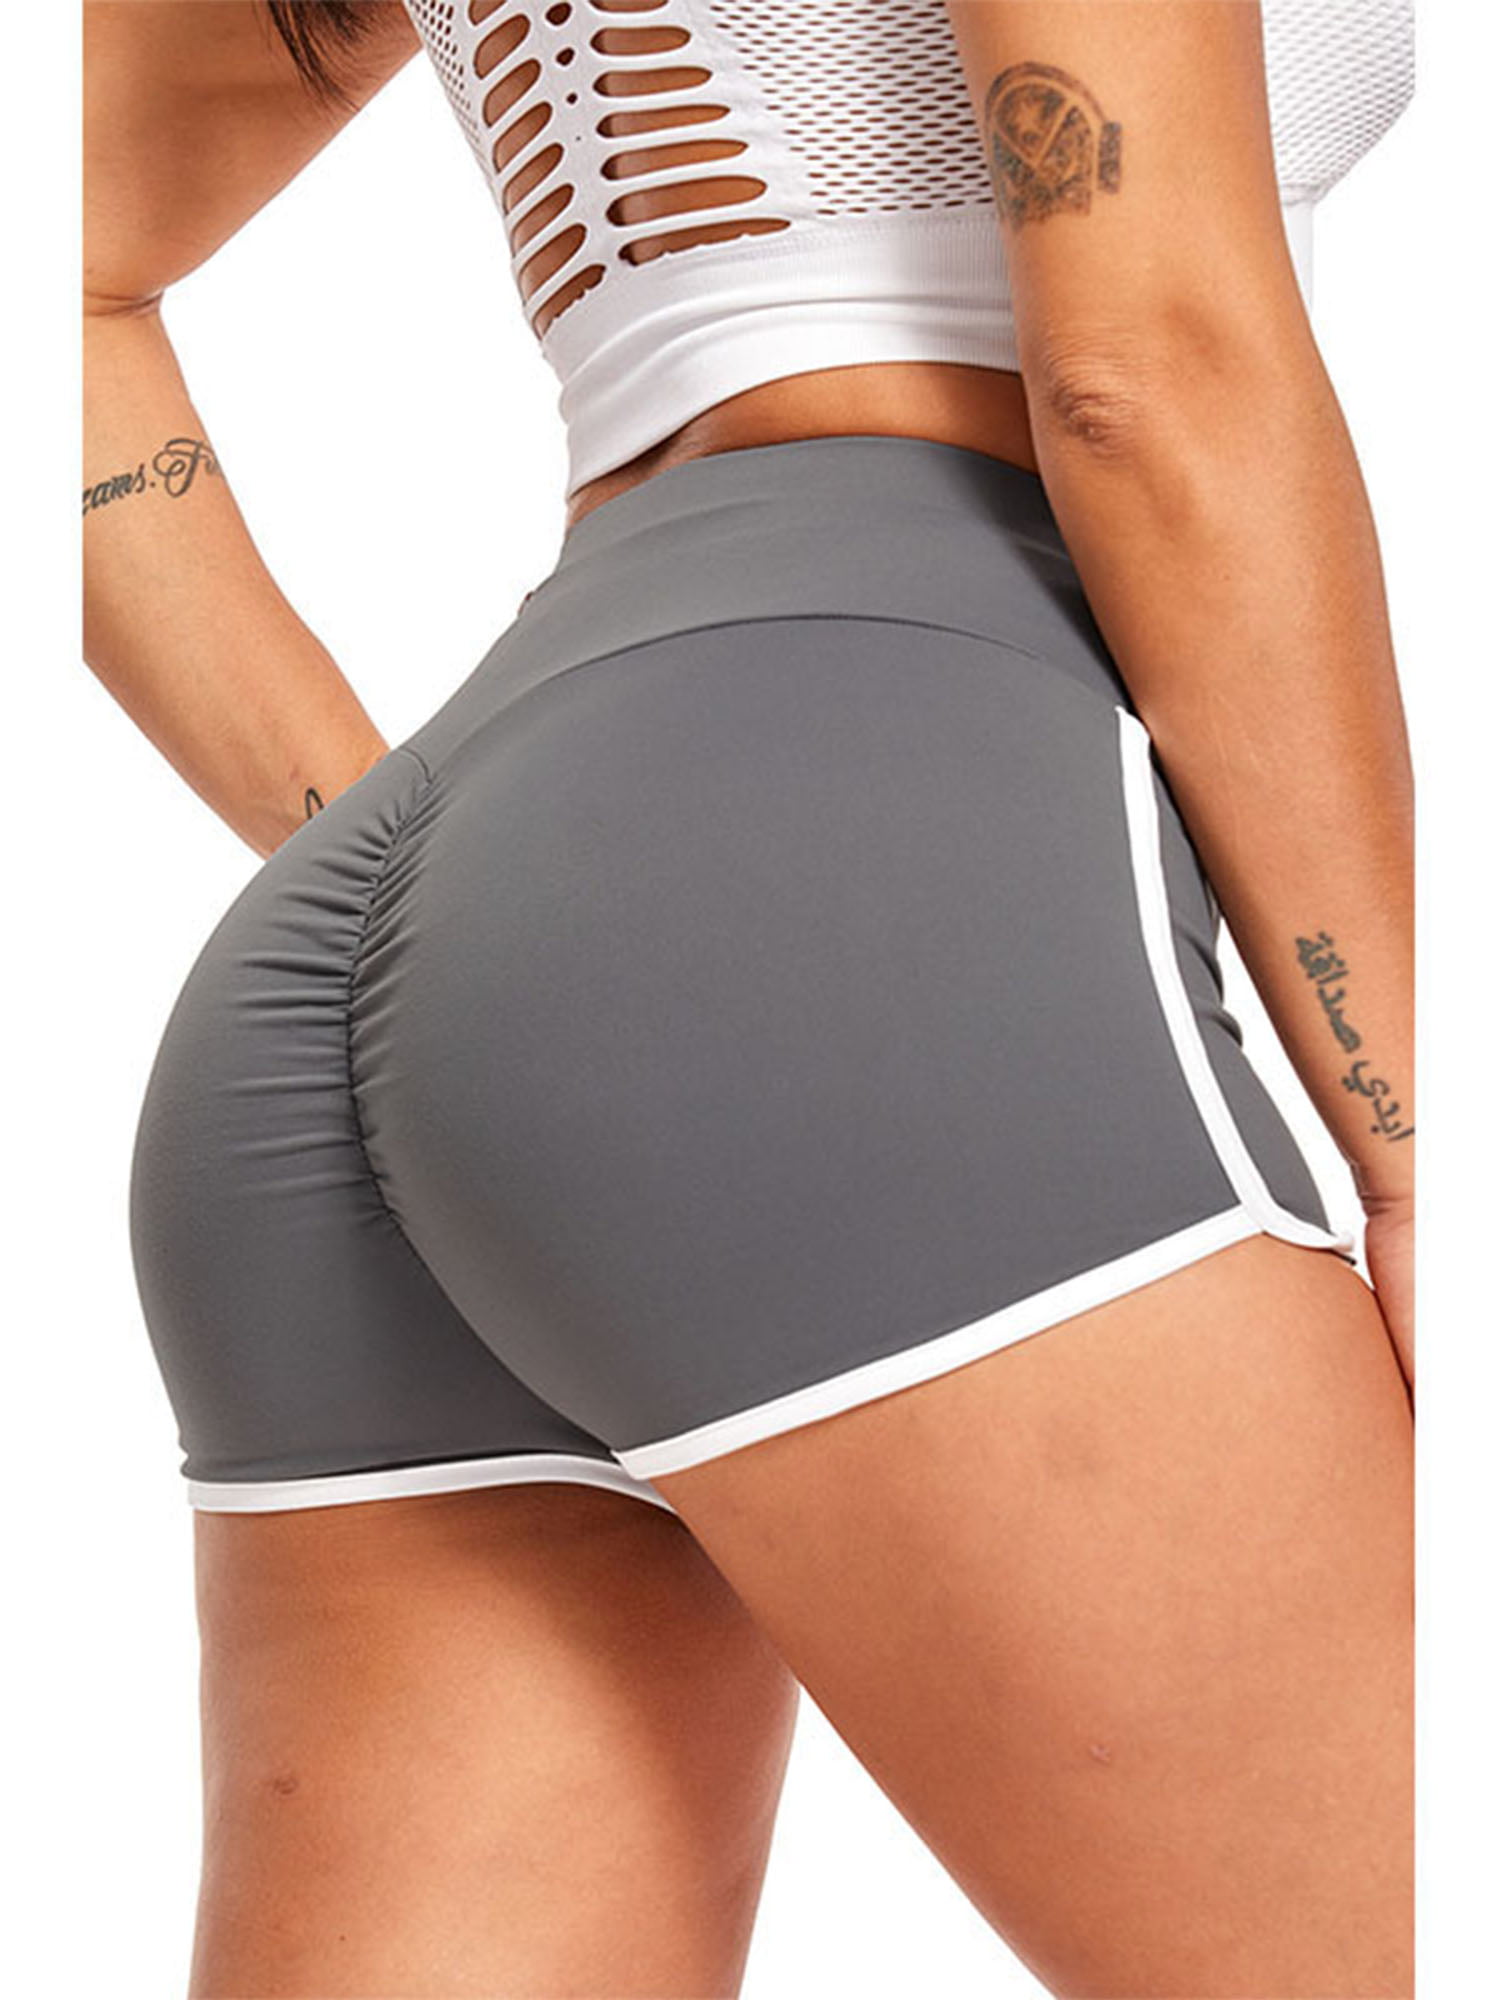 Sexy women shorts booty for Women's Sexy